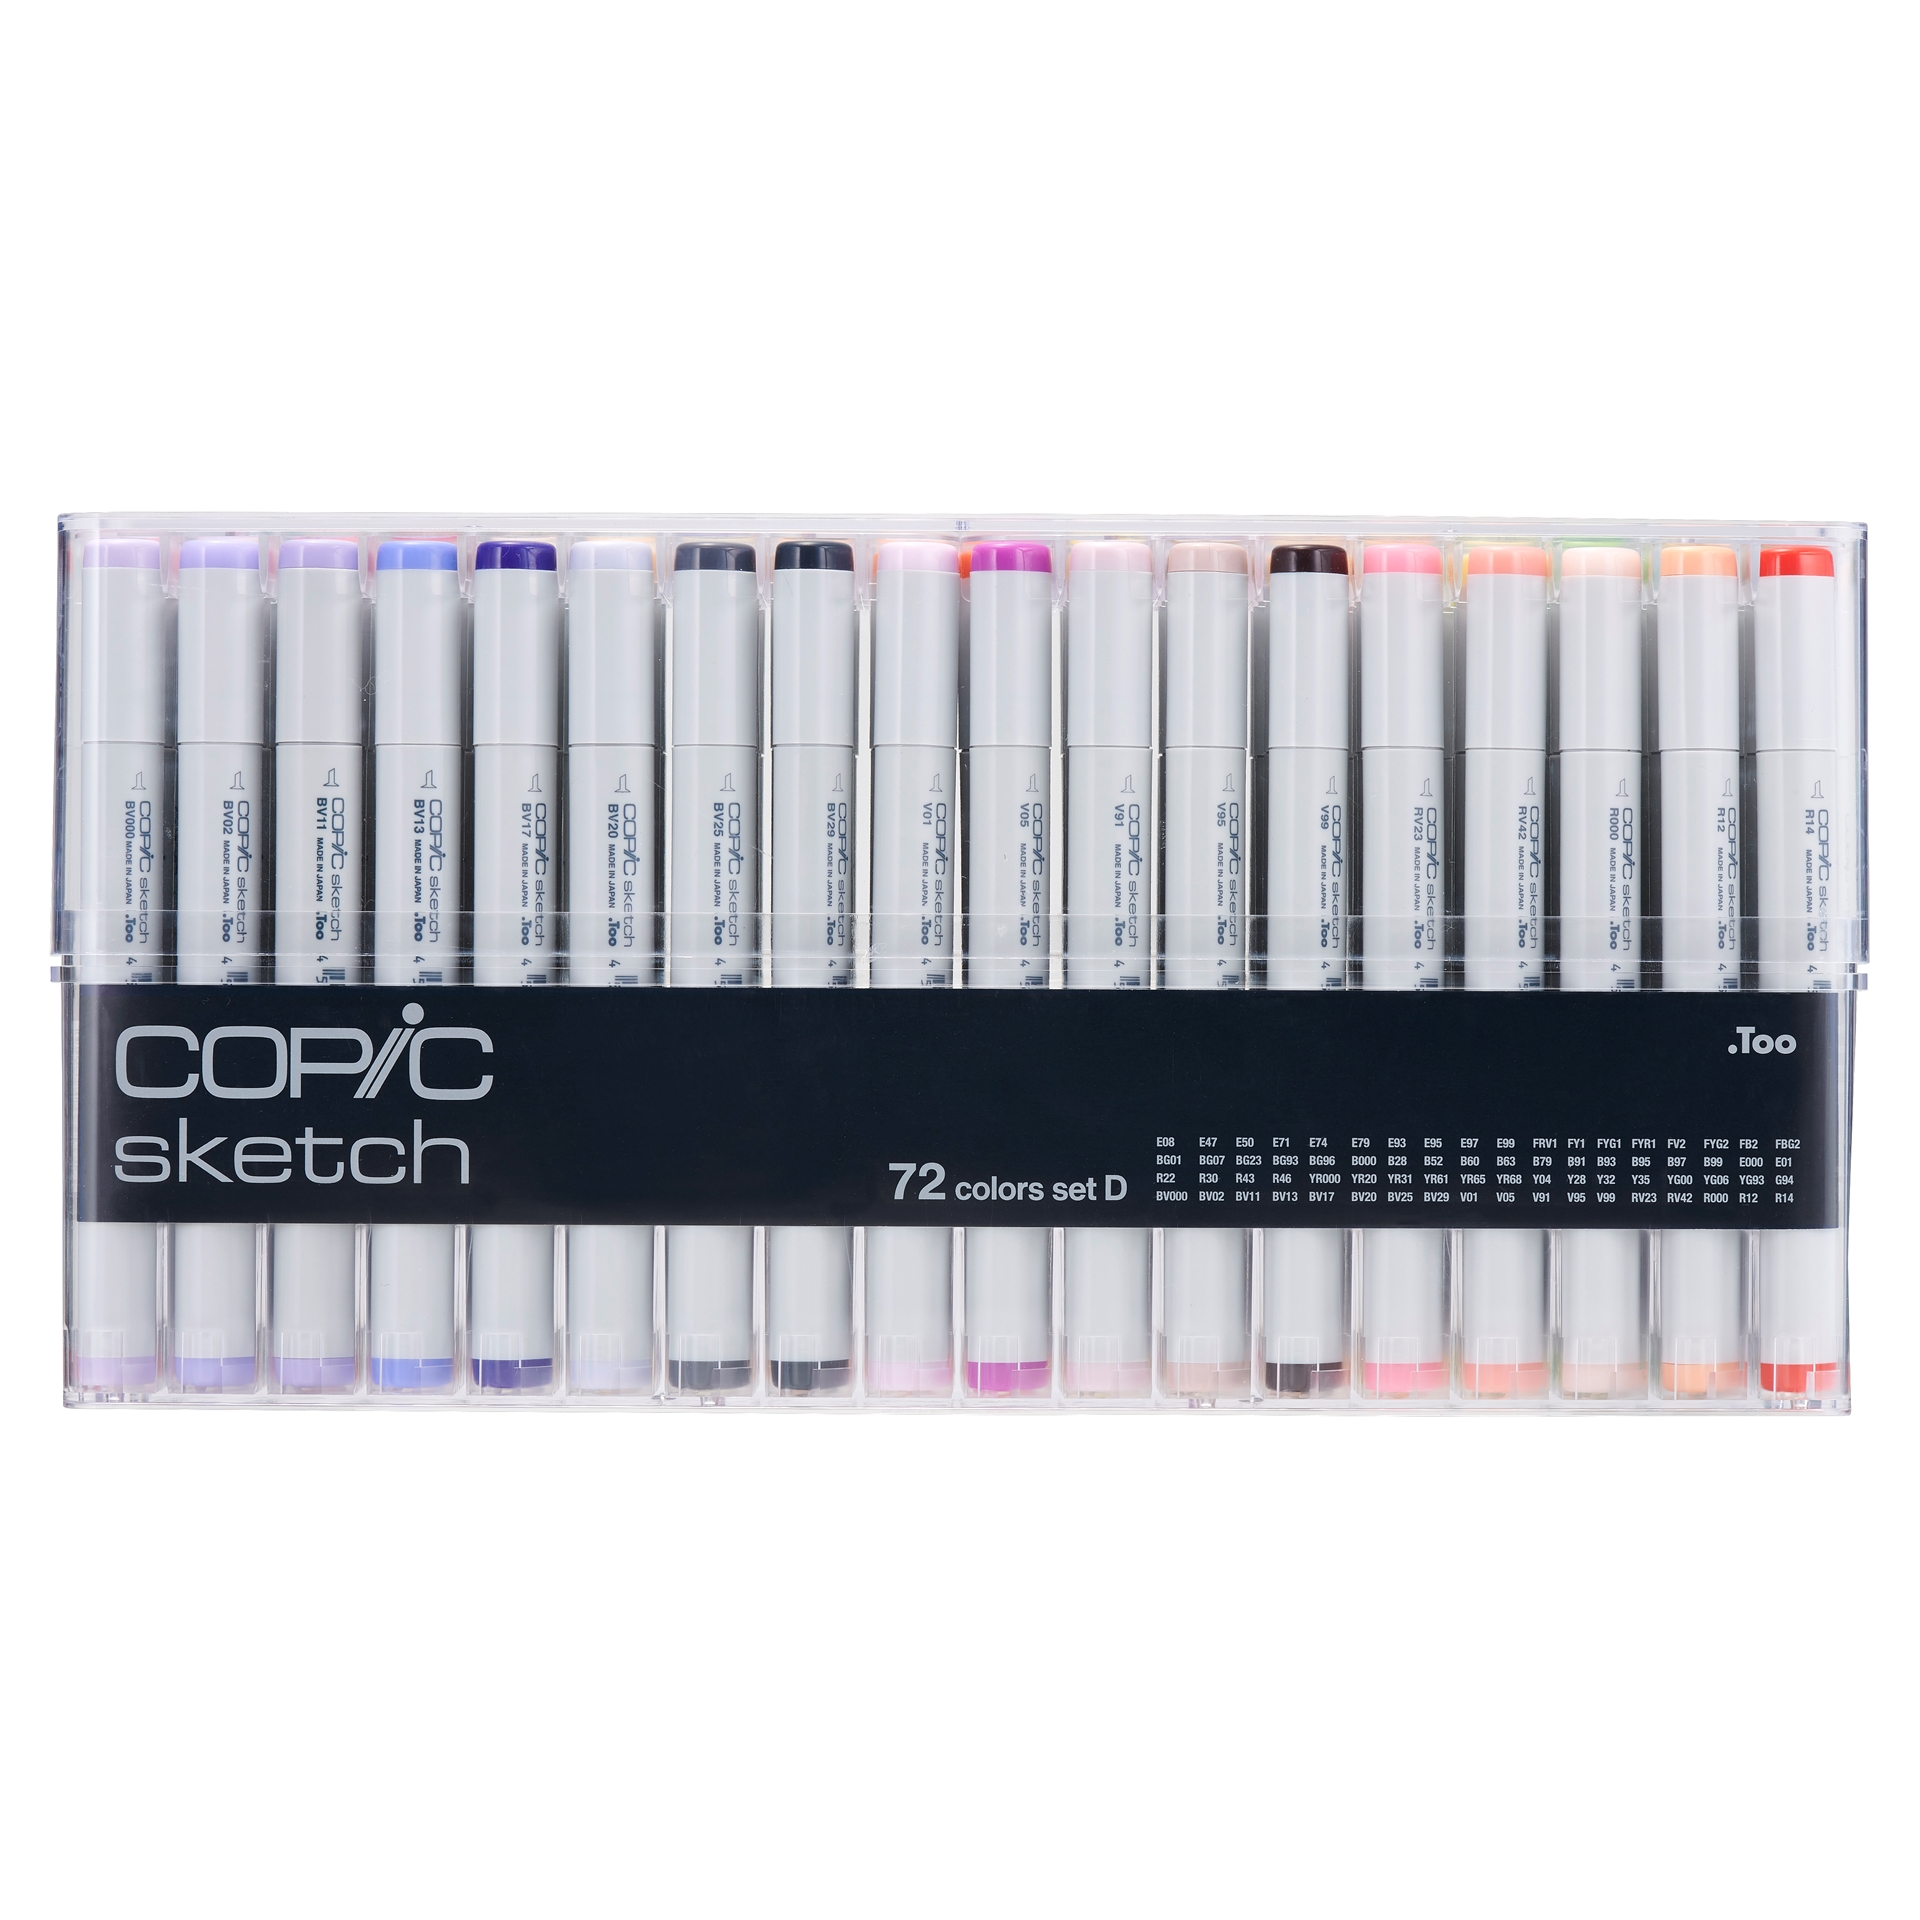 Details more than 141 copic sketch markers australia super hot